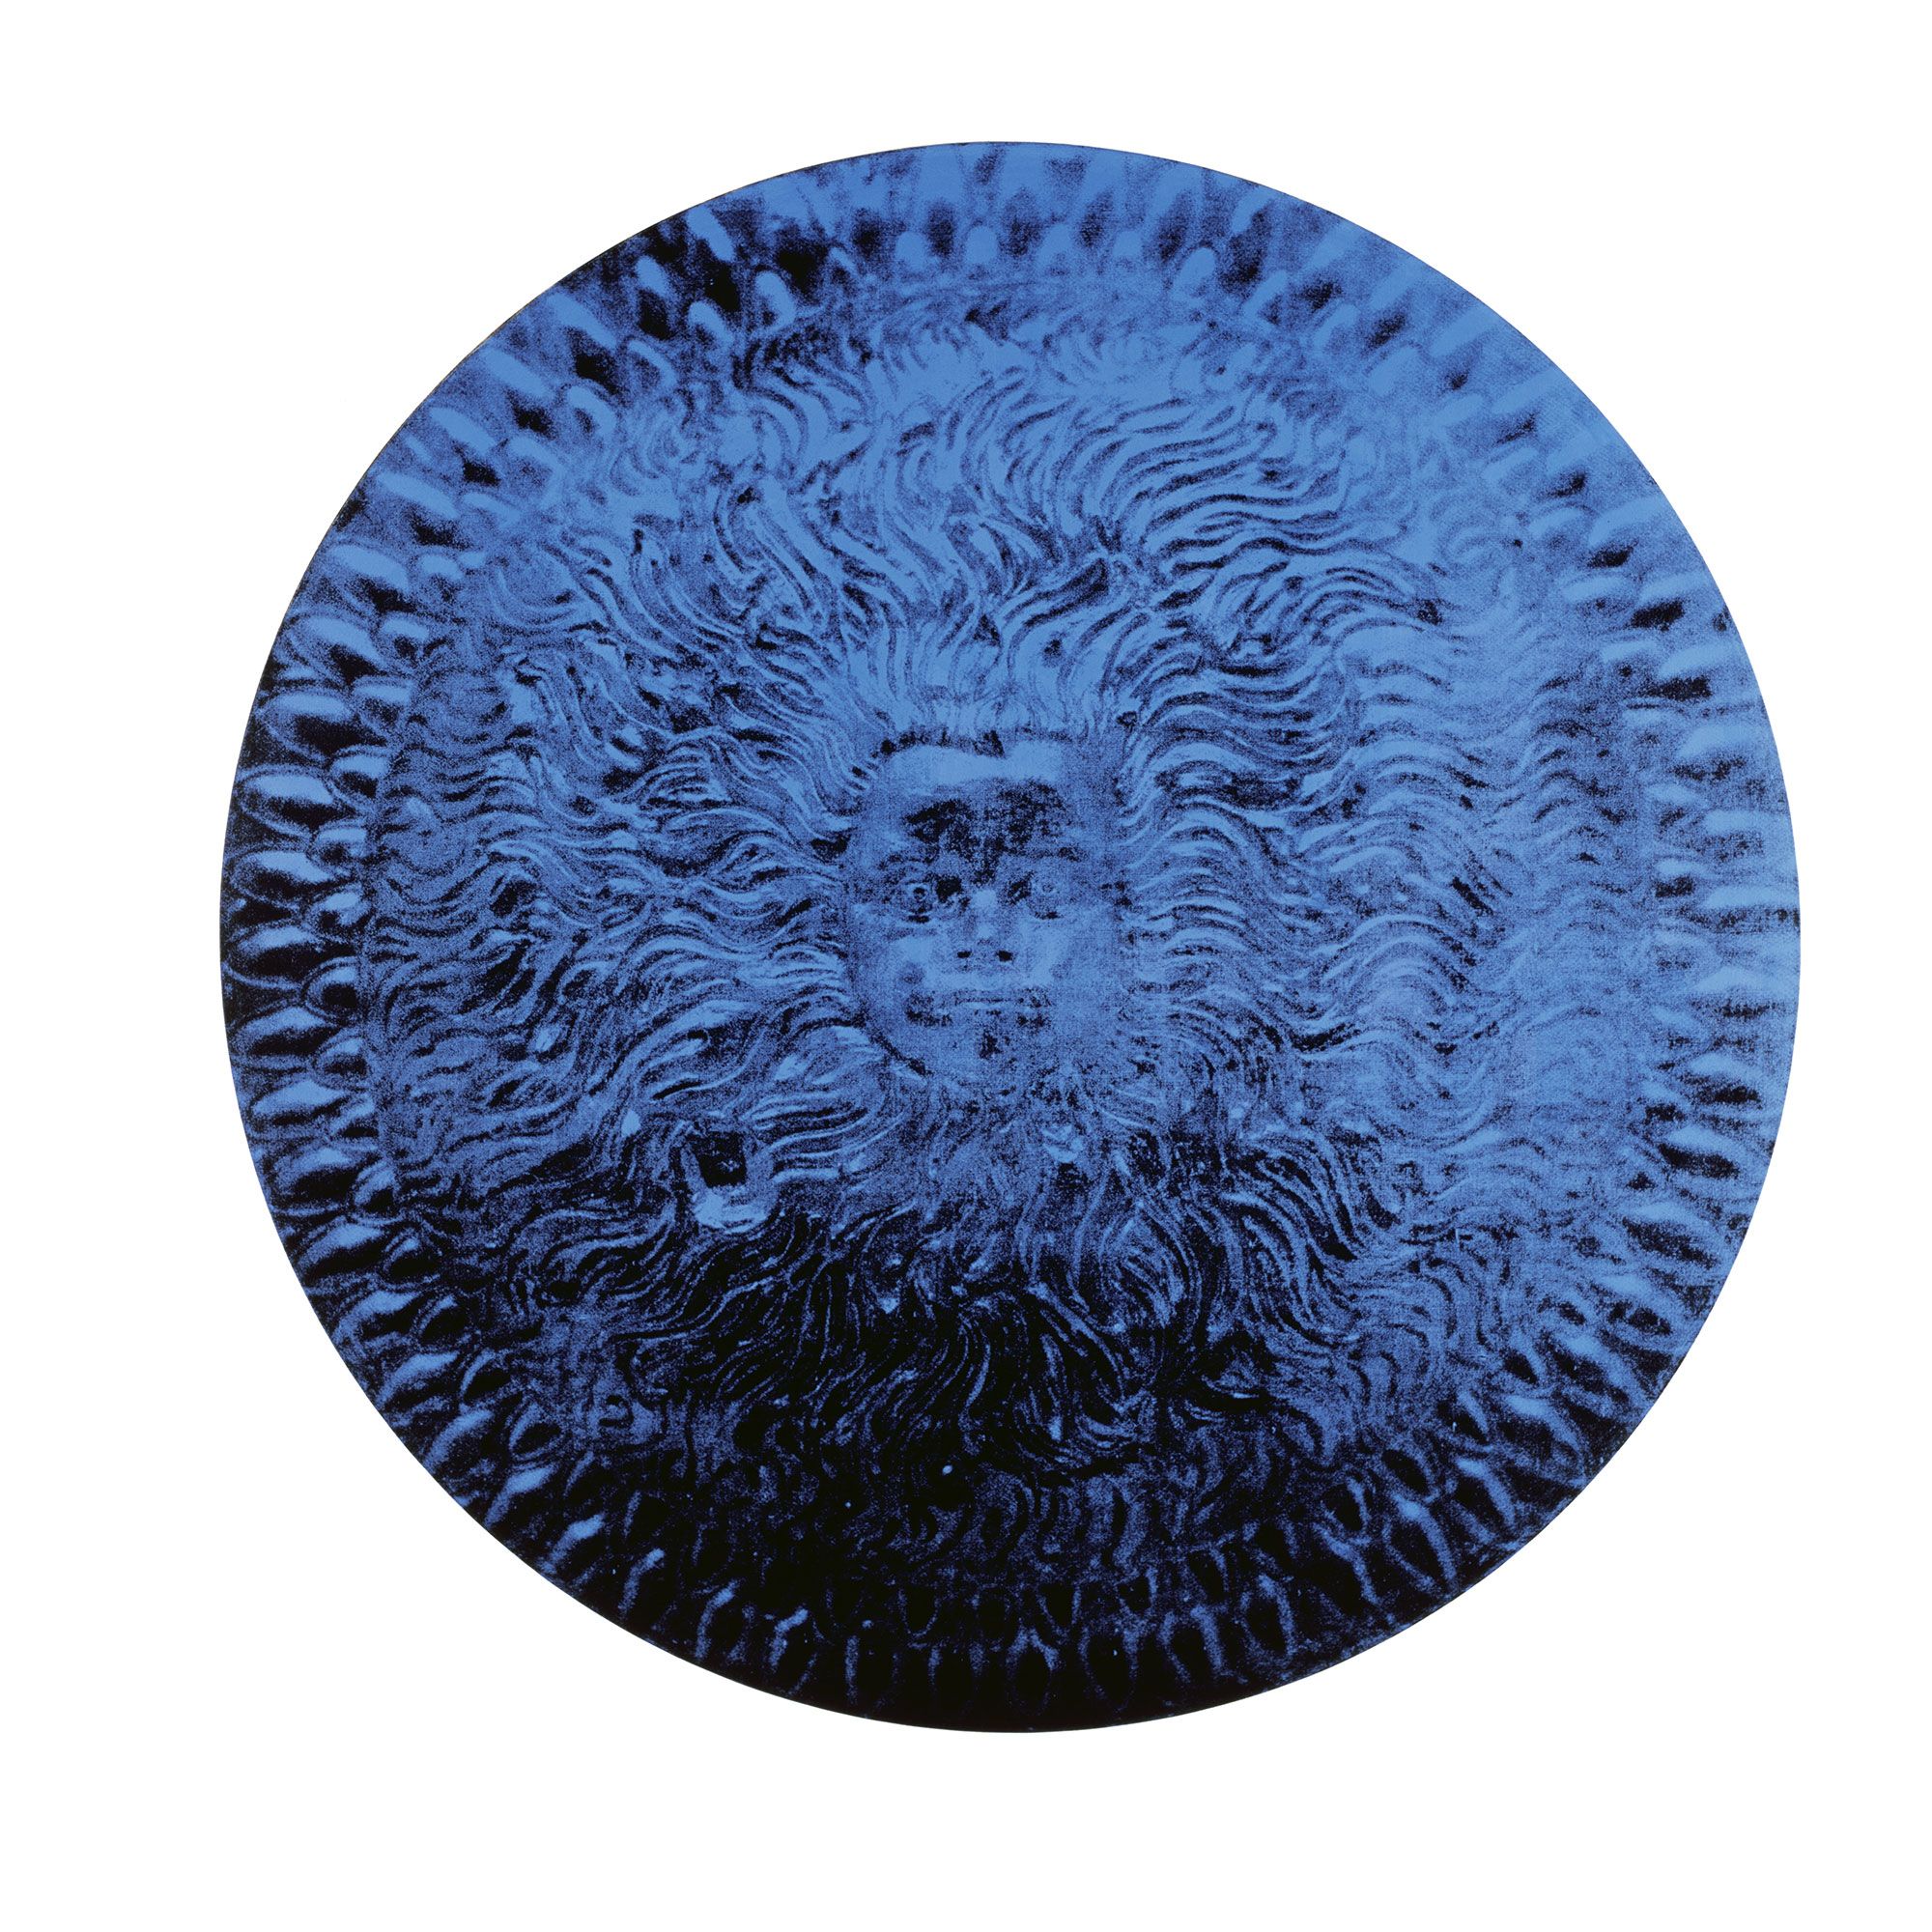 Oil on round canvas painting of a child's face in centre of Greek battle shield (blue version).